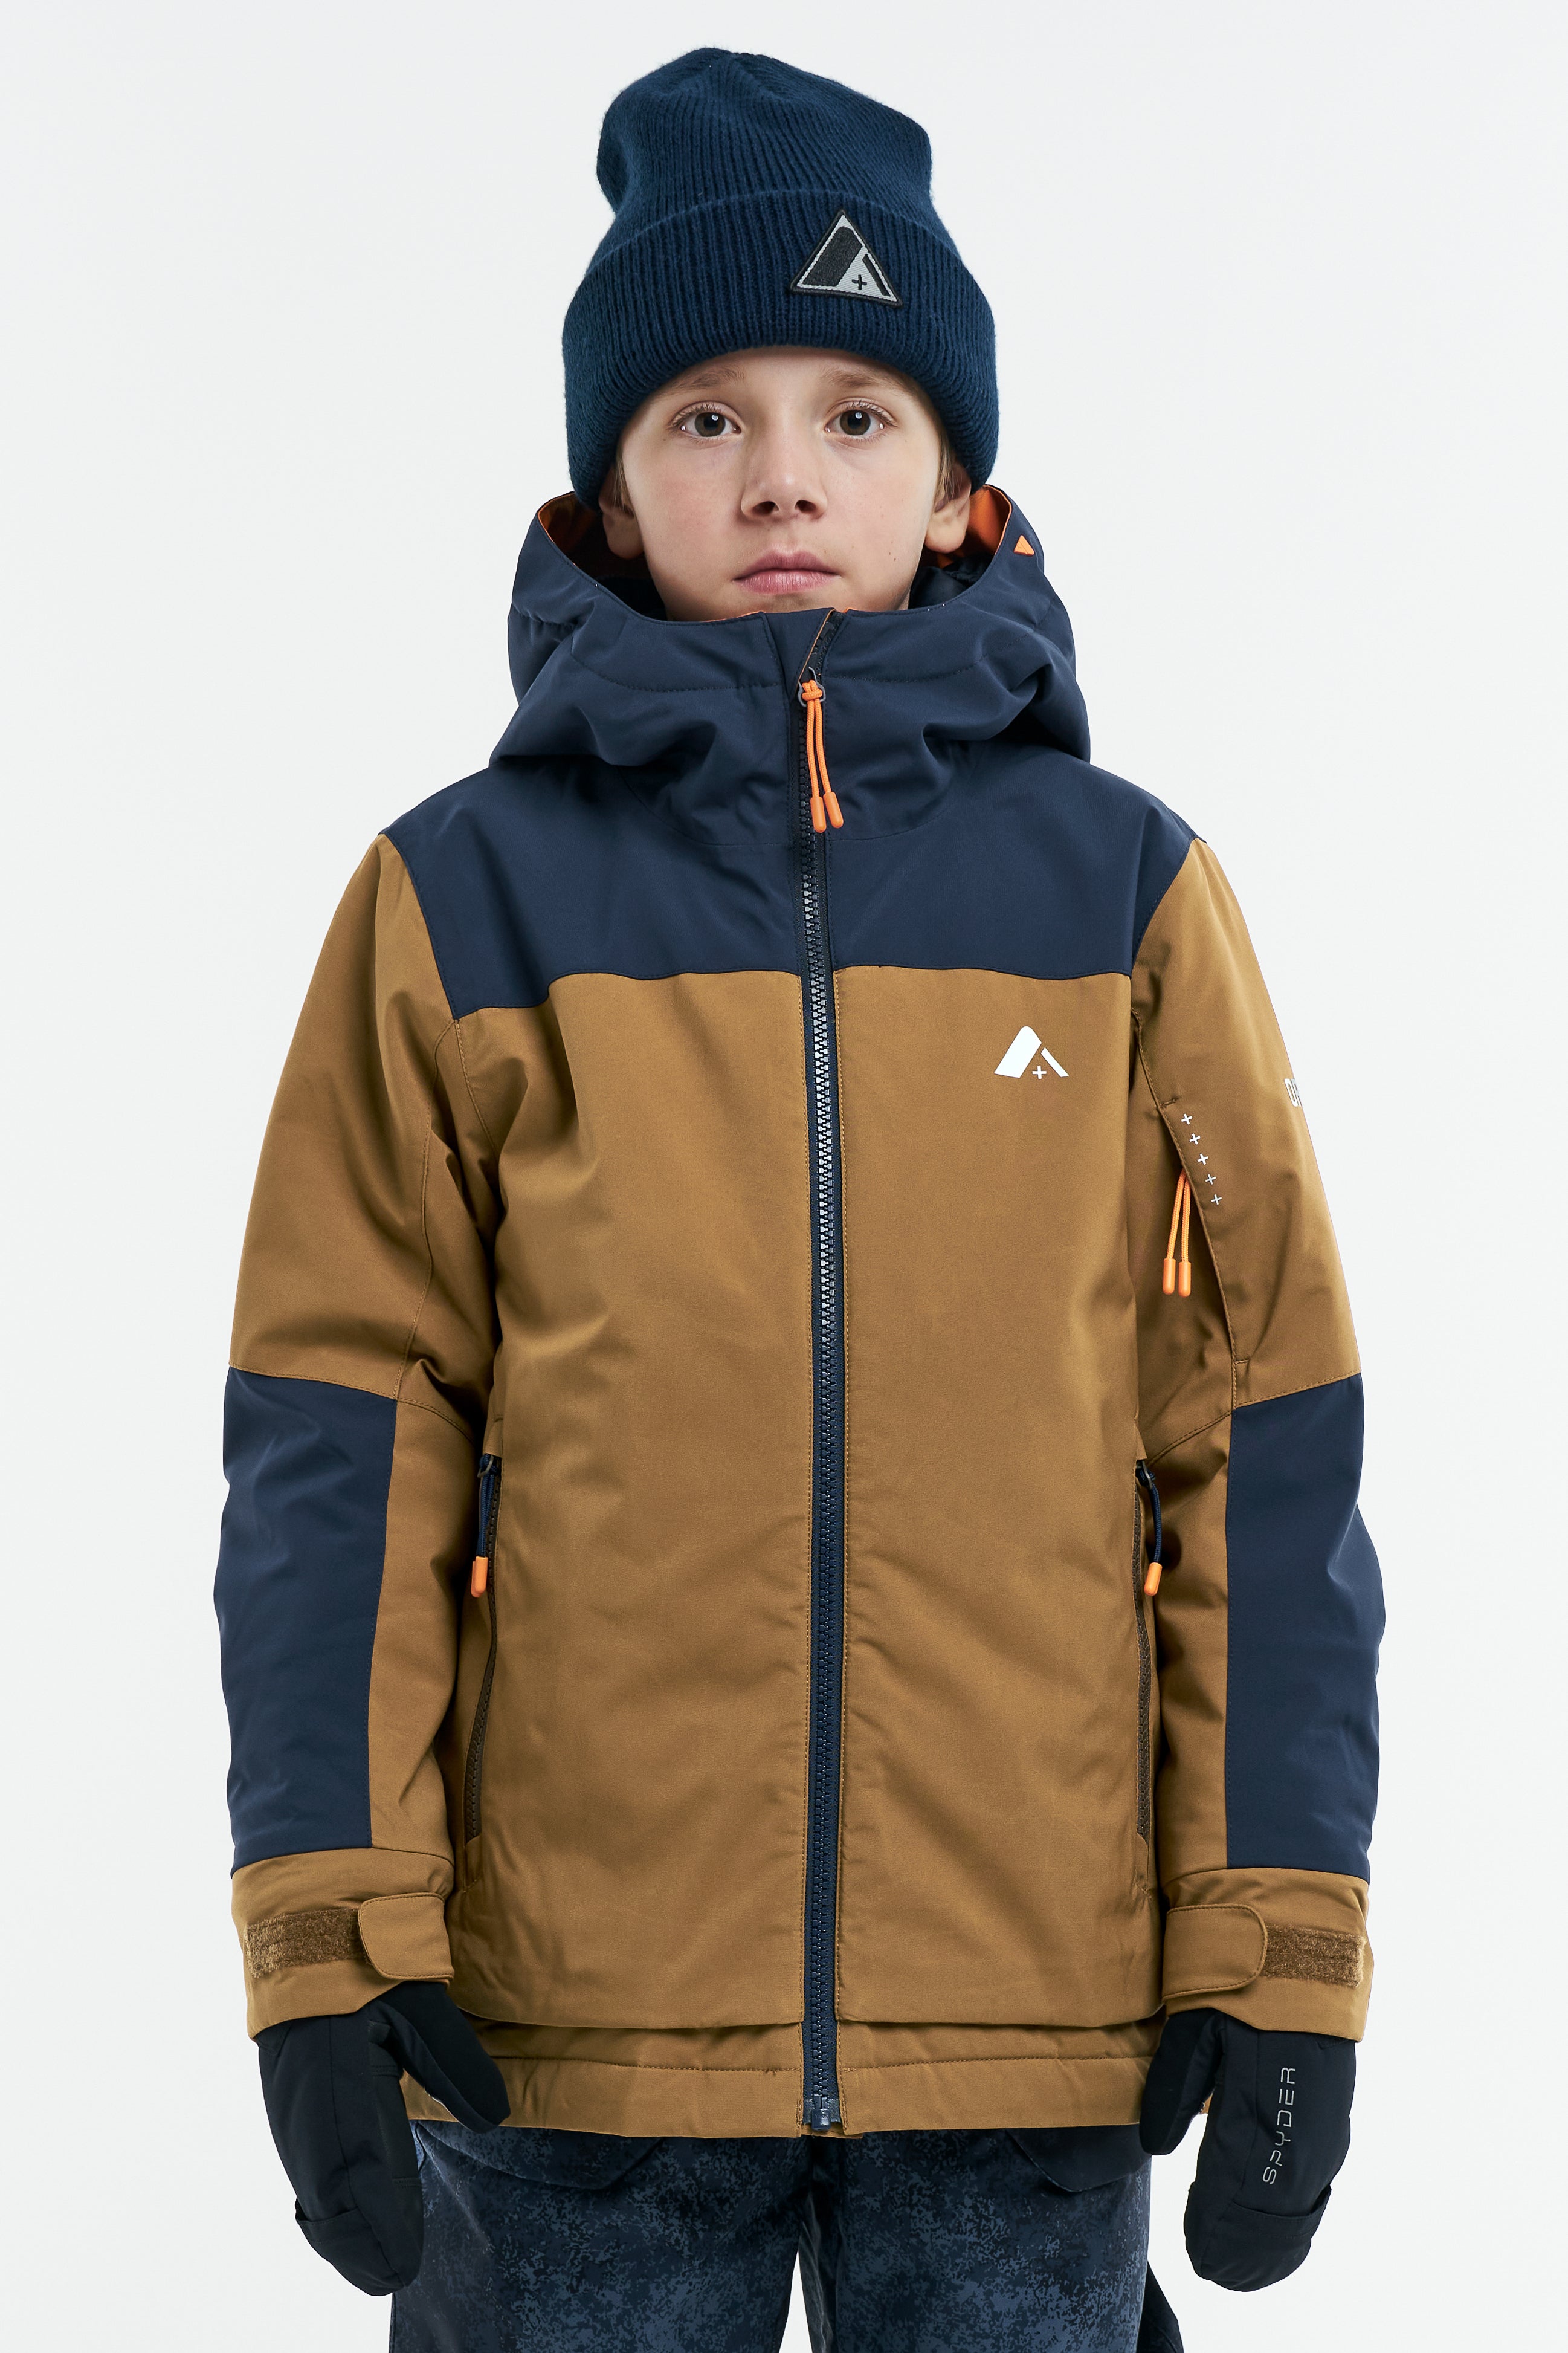 Orage JR Orford Insulated Jacket - Winter 2022/2023